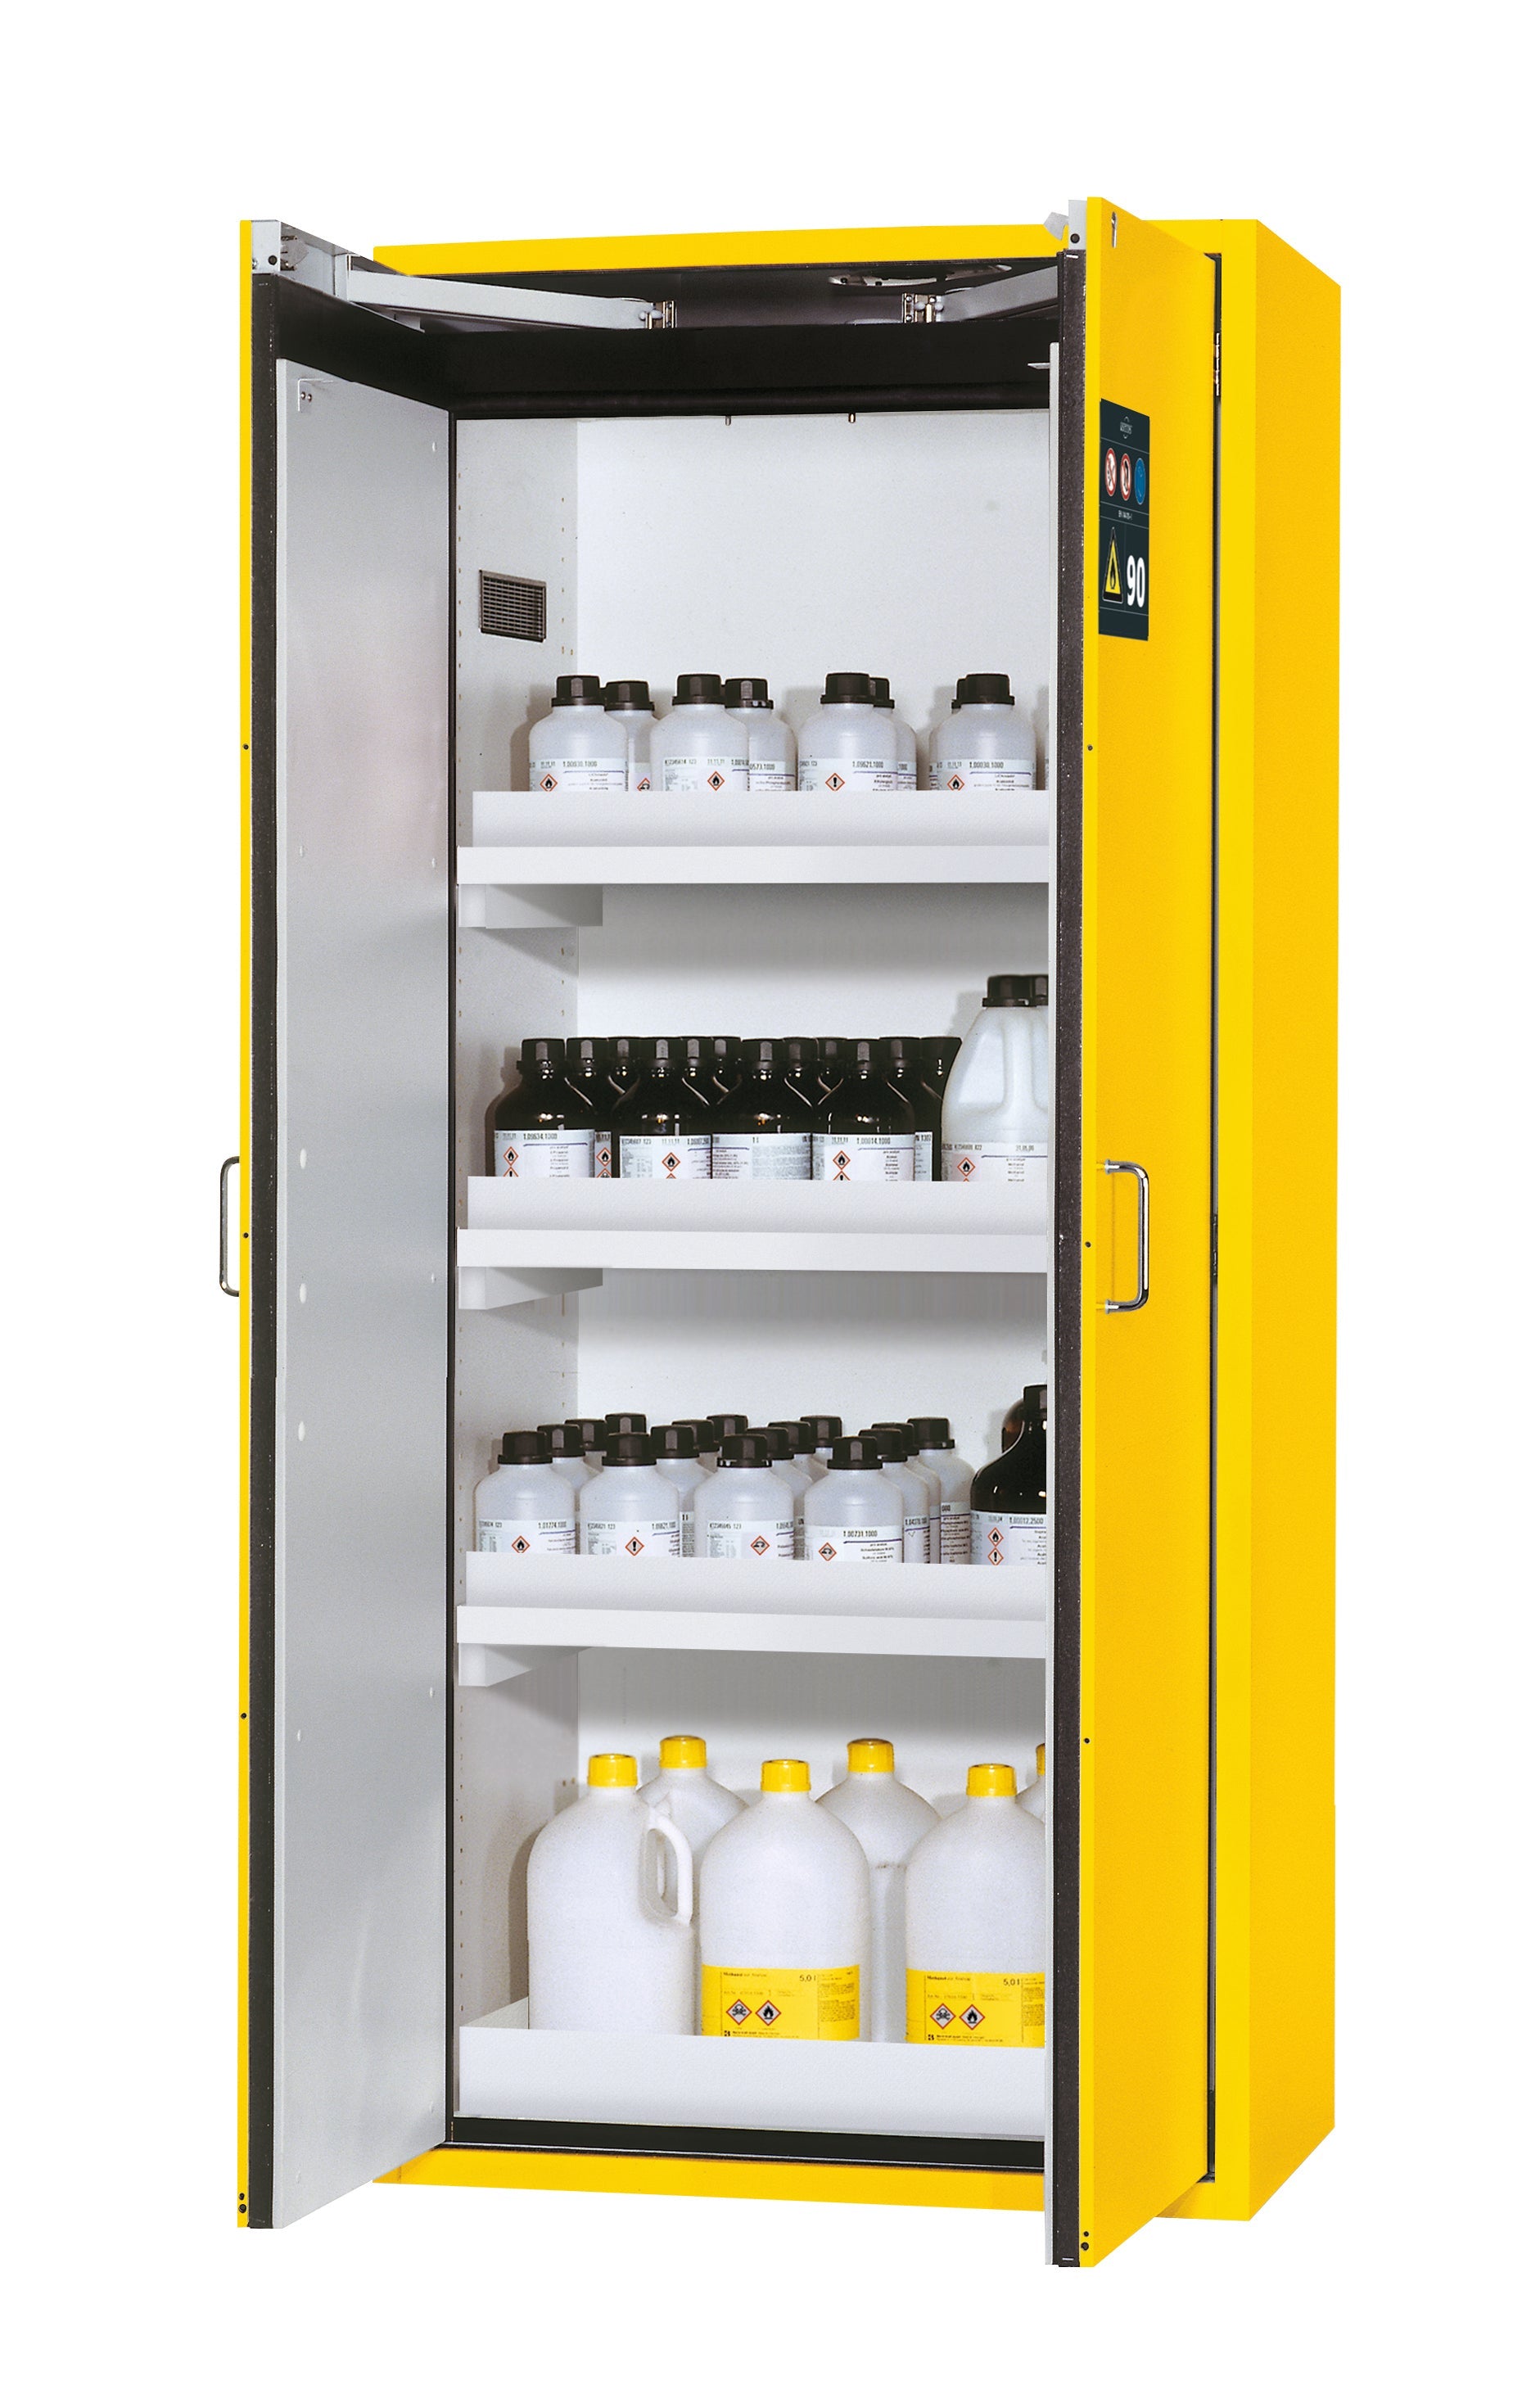 Type 90 safety cabinet S-CLASSIC-90 model S90.196.090 in safety yellow RAL 1004 with 3x standard tray base (polypropylene)